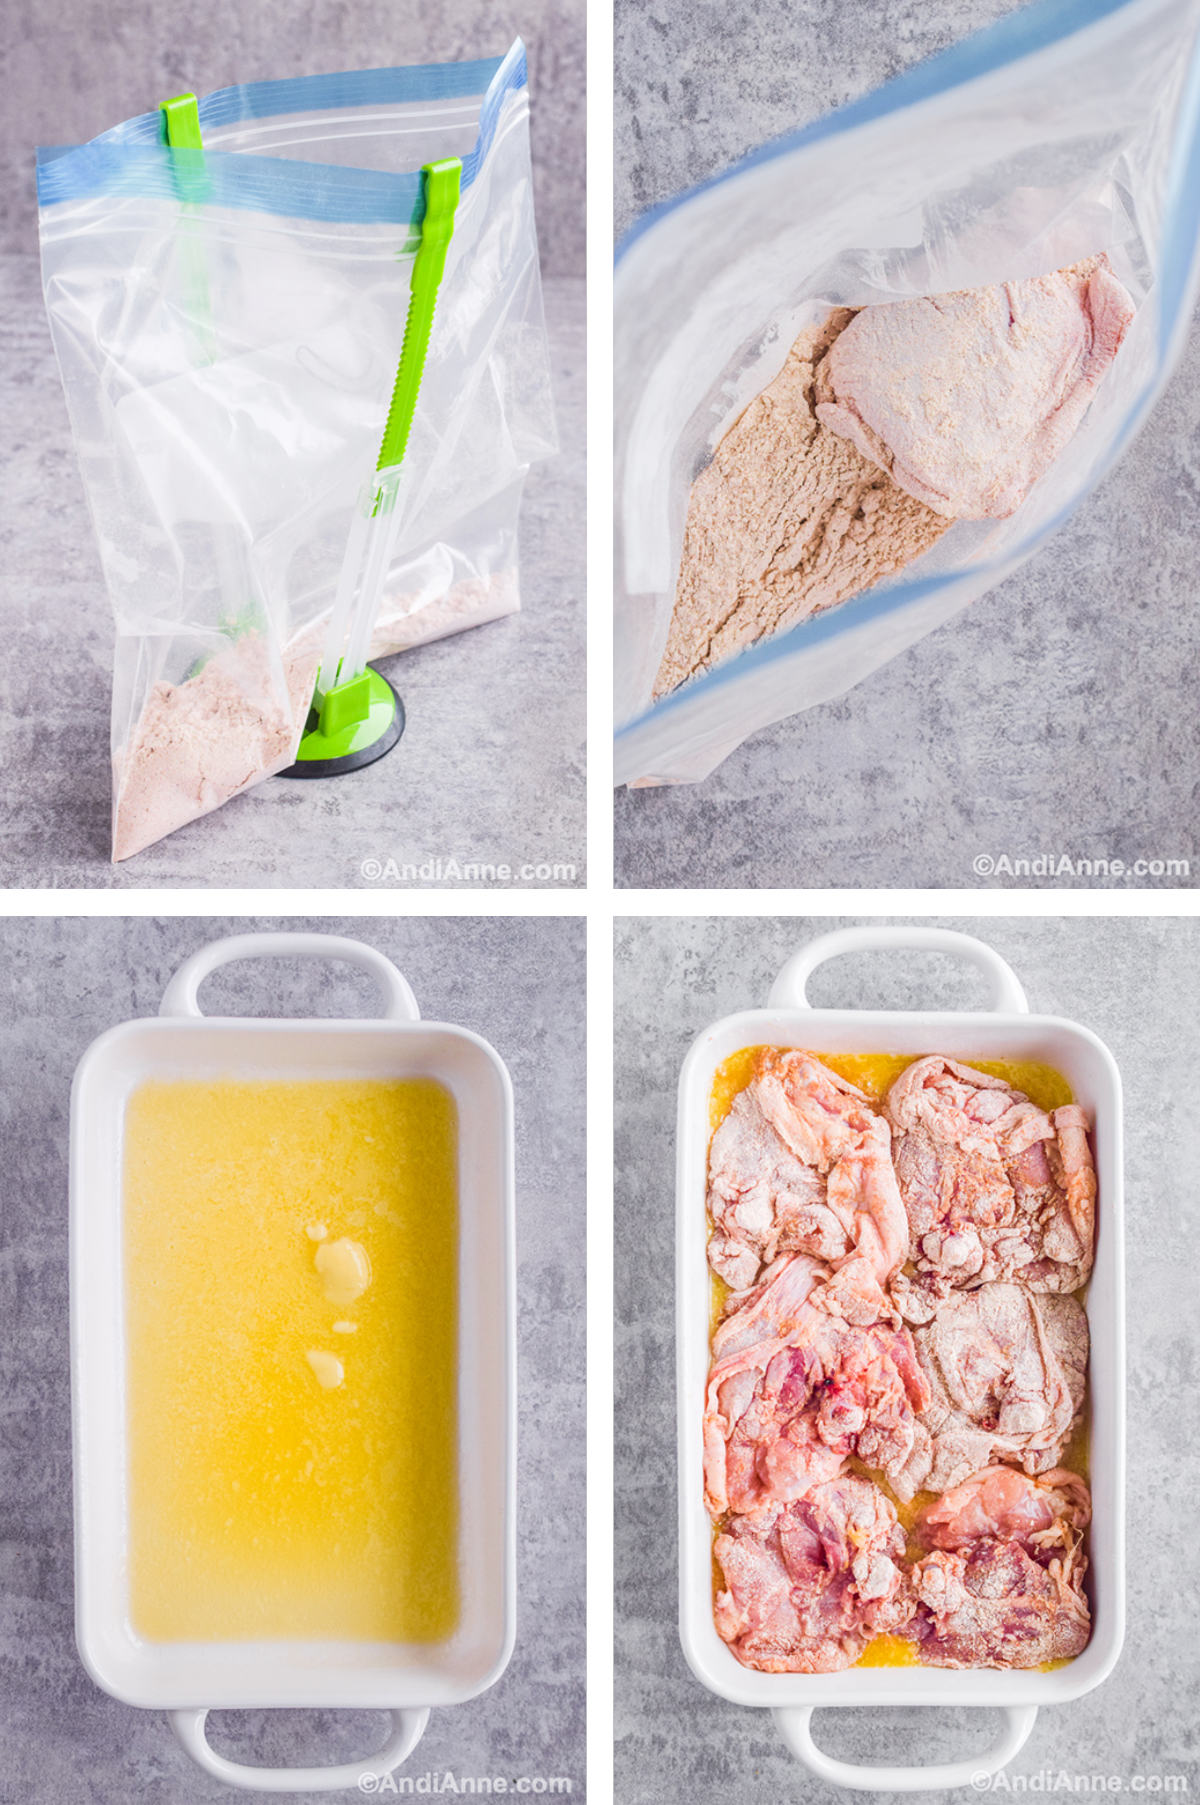 Four overhead images in one: 1. Ingredients for coating are put into a zip-top bag. 2. Ingredients are shaken and a raw chicken thigh is placed inside the bag. 3. Melted butter in the baking dish. 4. Raw chicken added skin side down into butter in baking dish. 